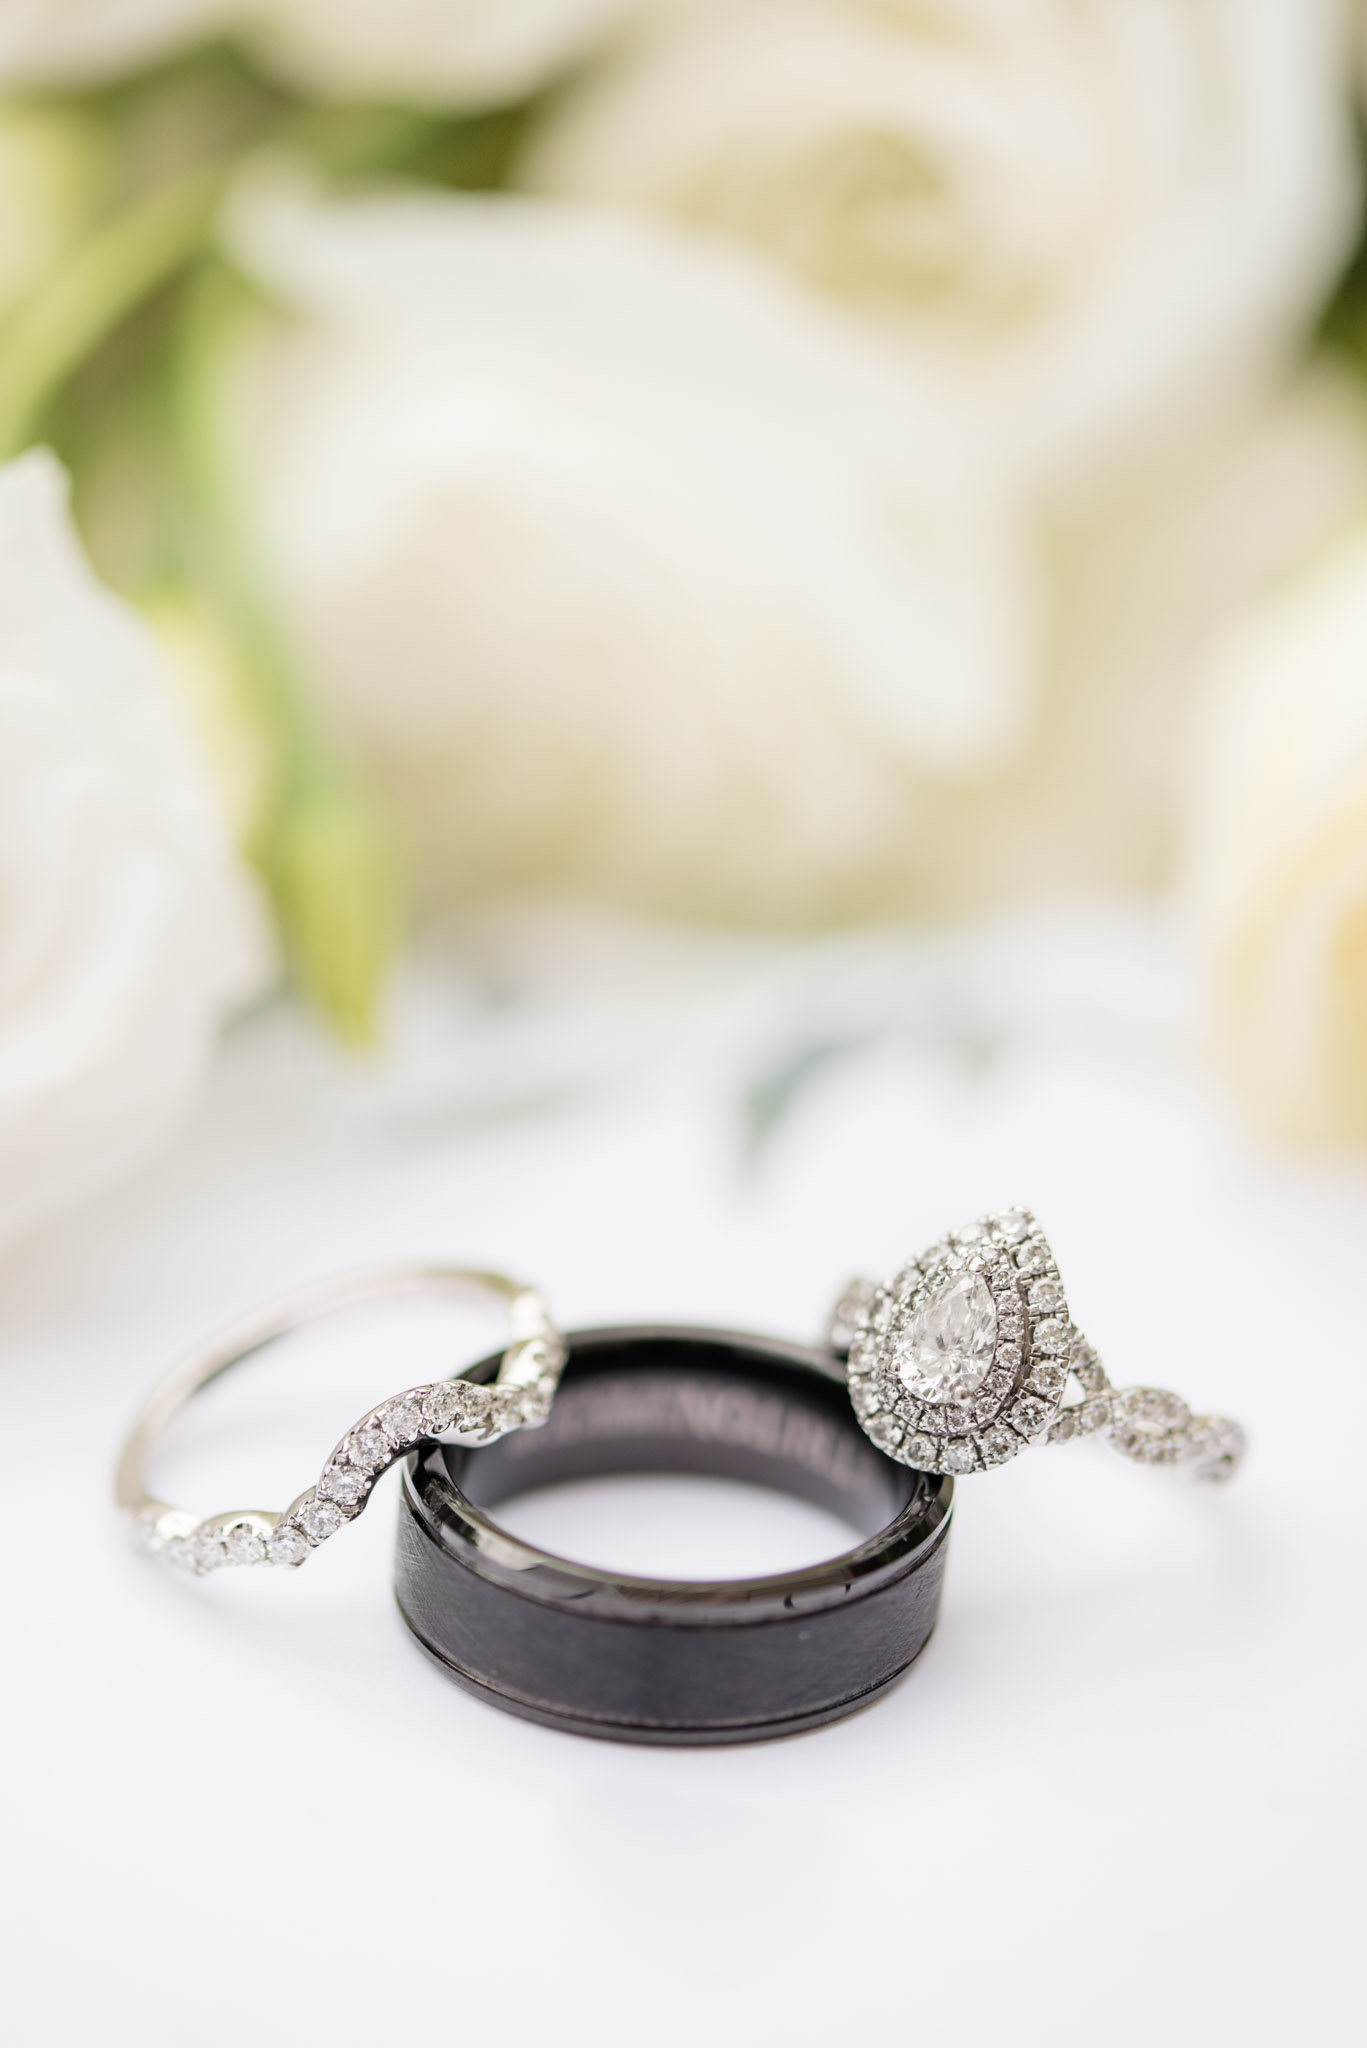 Wedding rings sit in front of flowers.